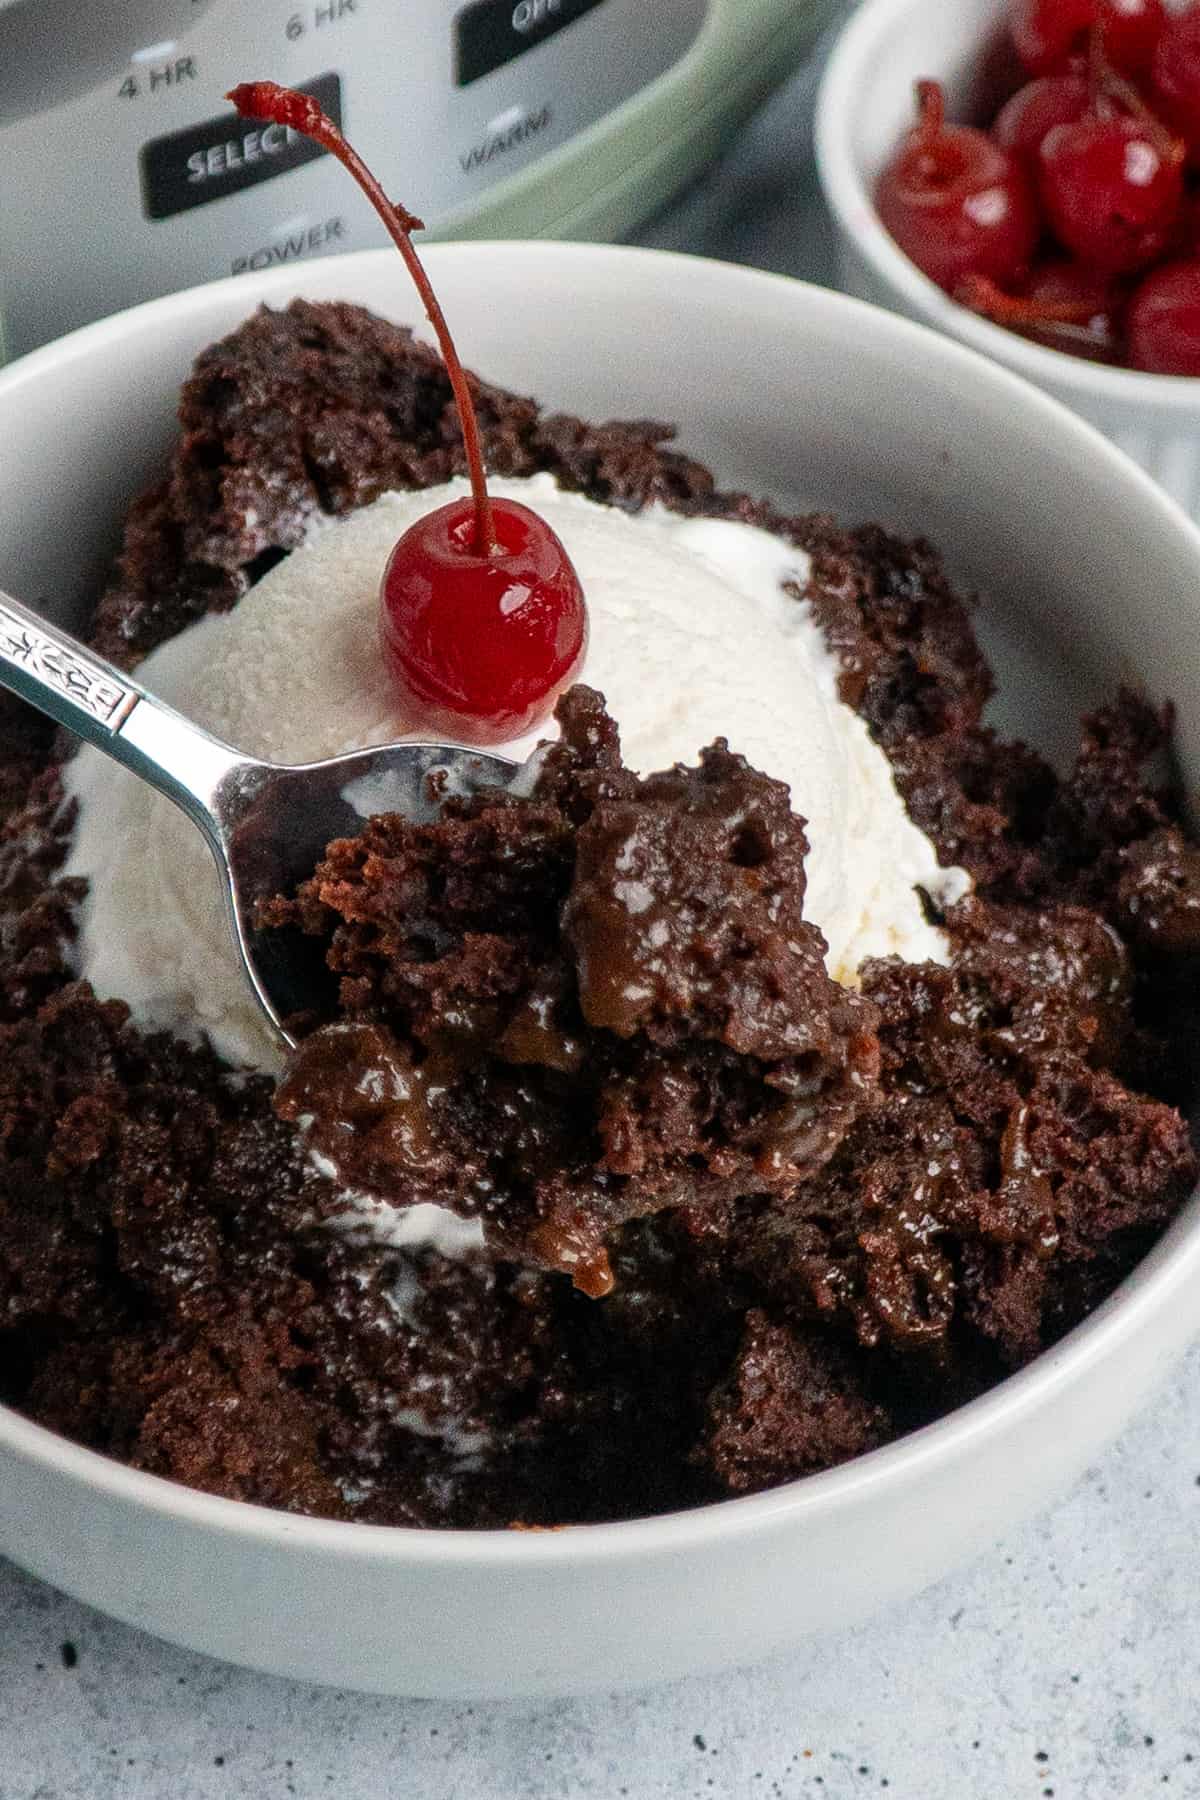 A spoon holding a bite of chocolate lava cake.